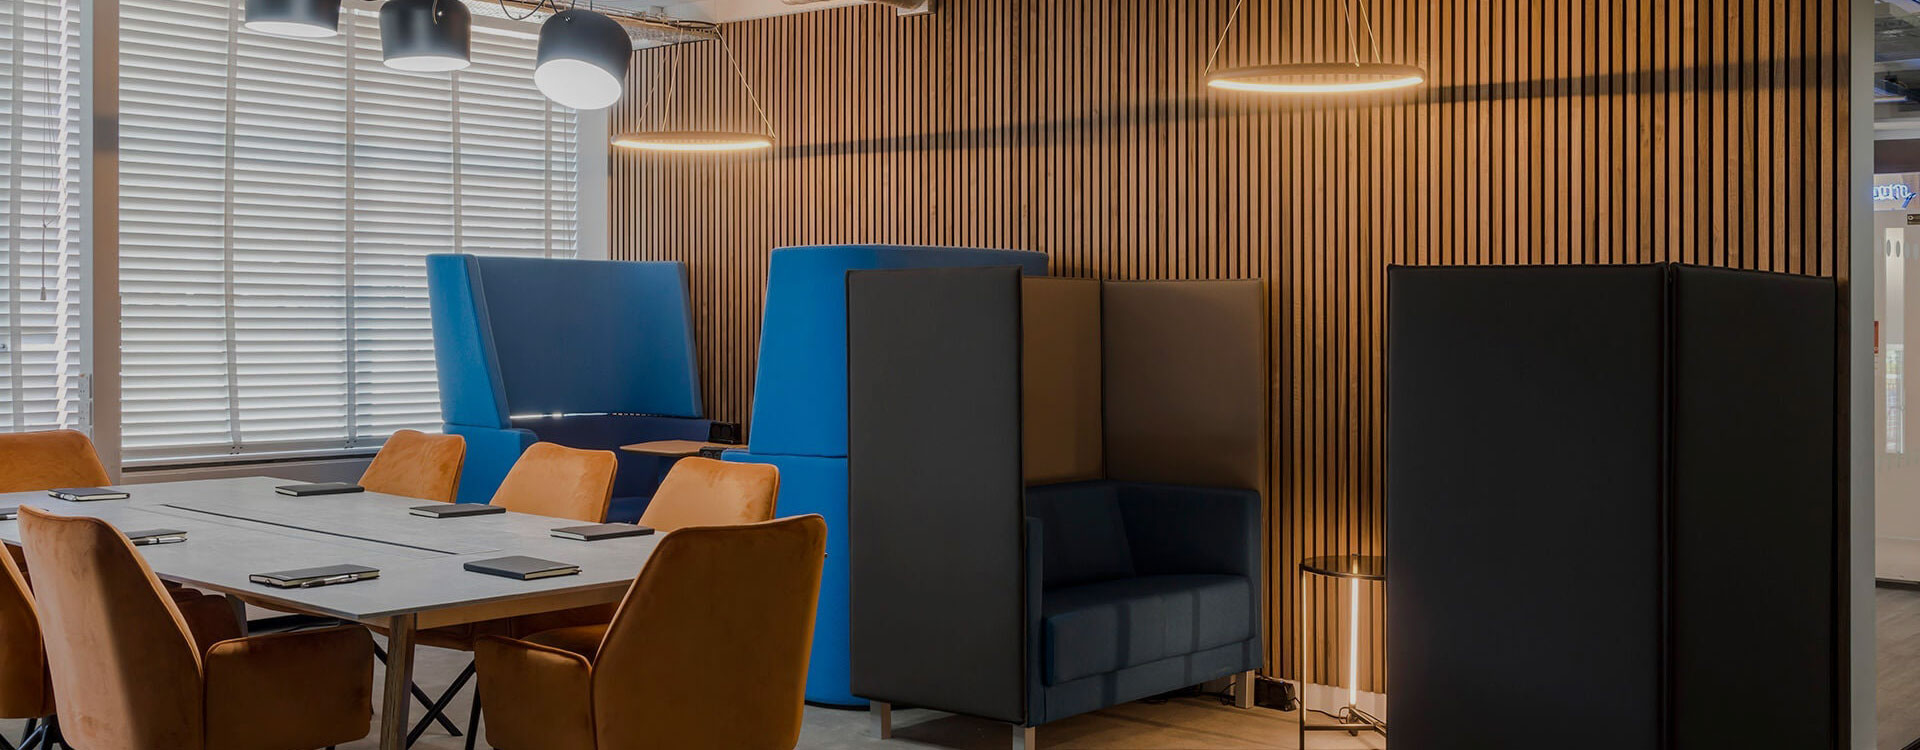 The Future Of Work – Exploring Trends In Office Design